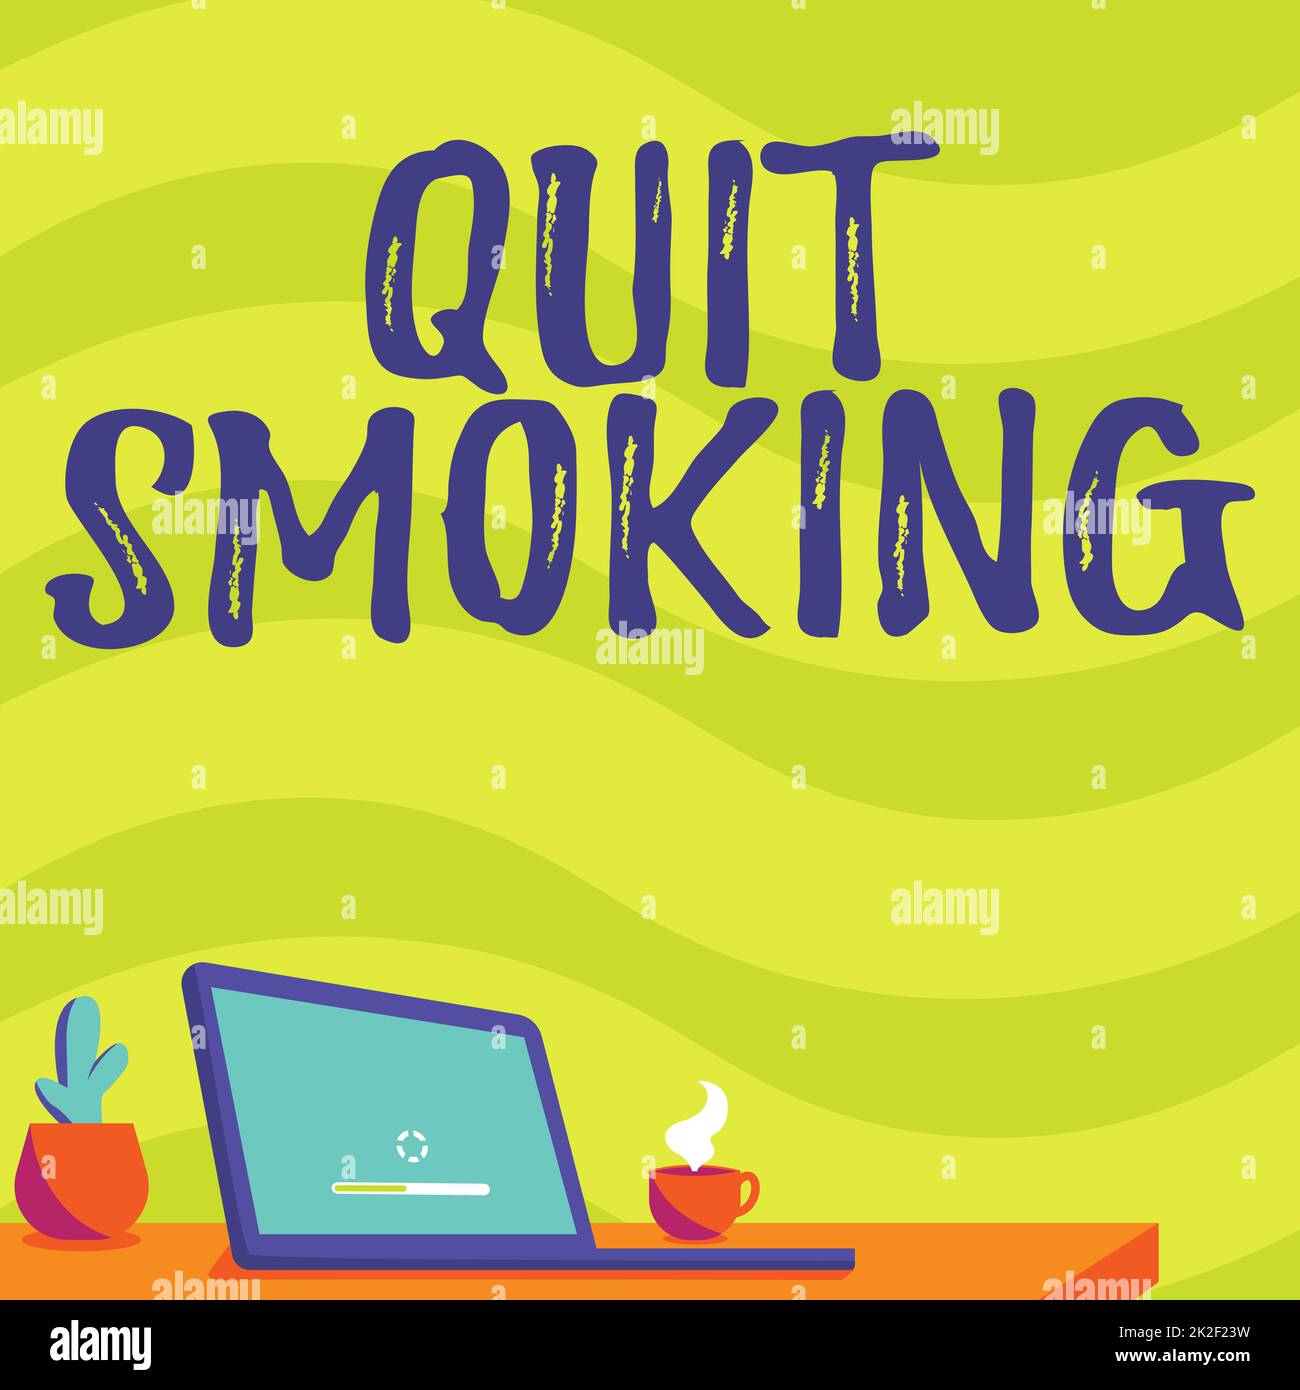 Writing displaying text Quit Smoking. Business approach process of discontinuing tobacco and any other smokers Office Desk Drawing With Laptop Pen Holder And An Open And Arranged Stock Photo